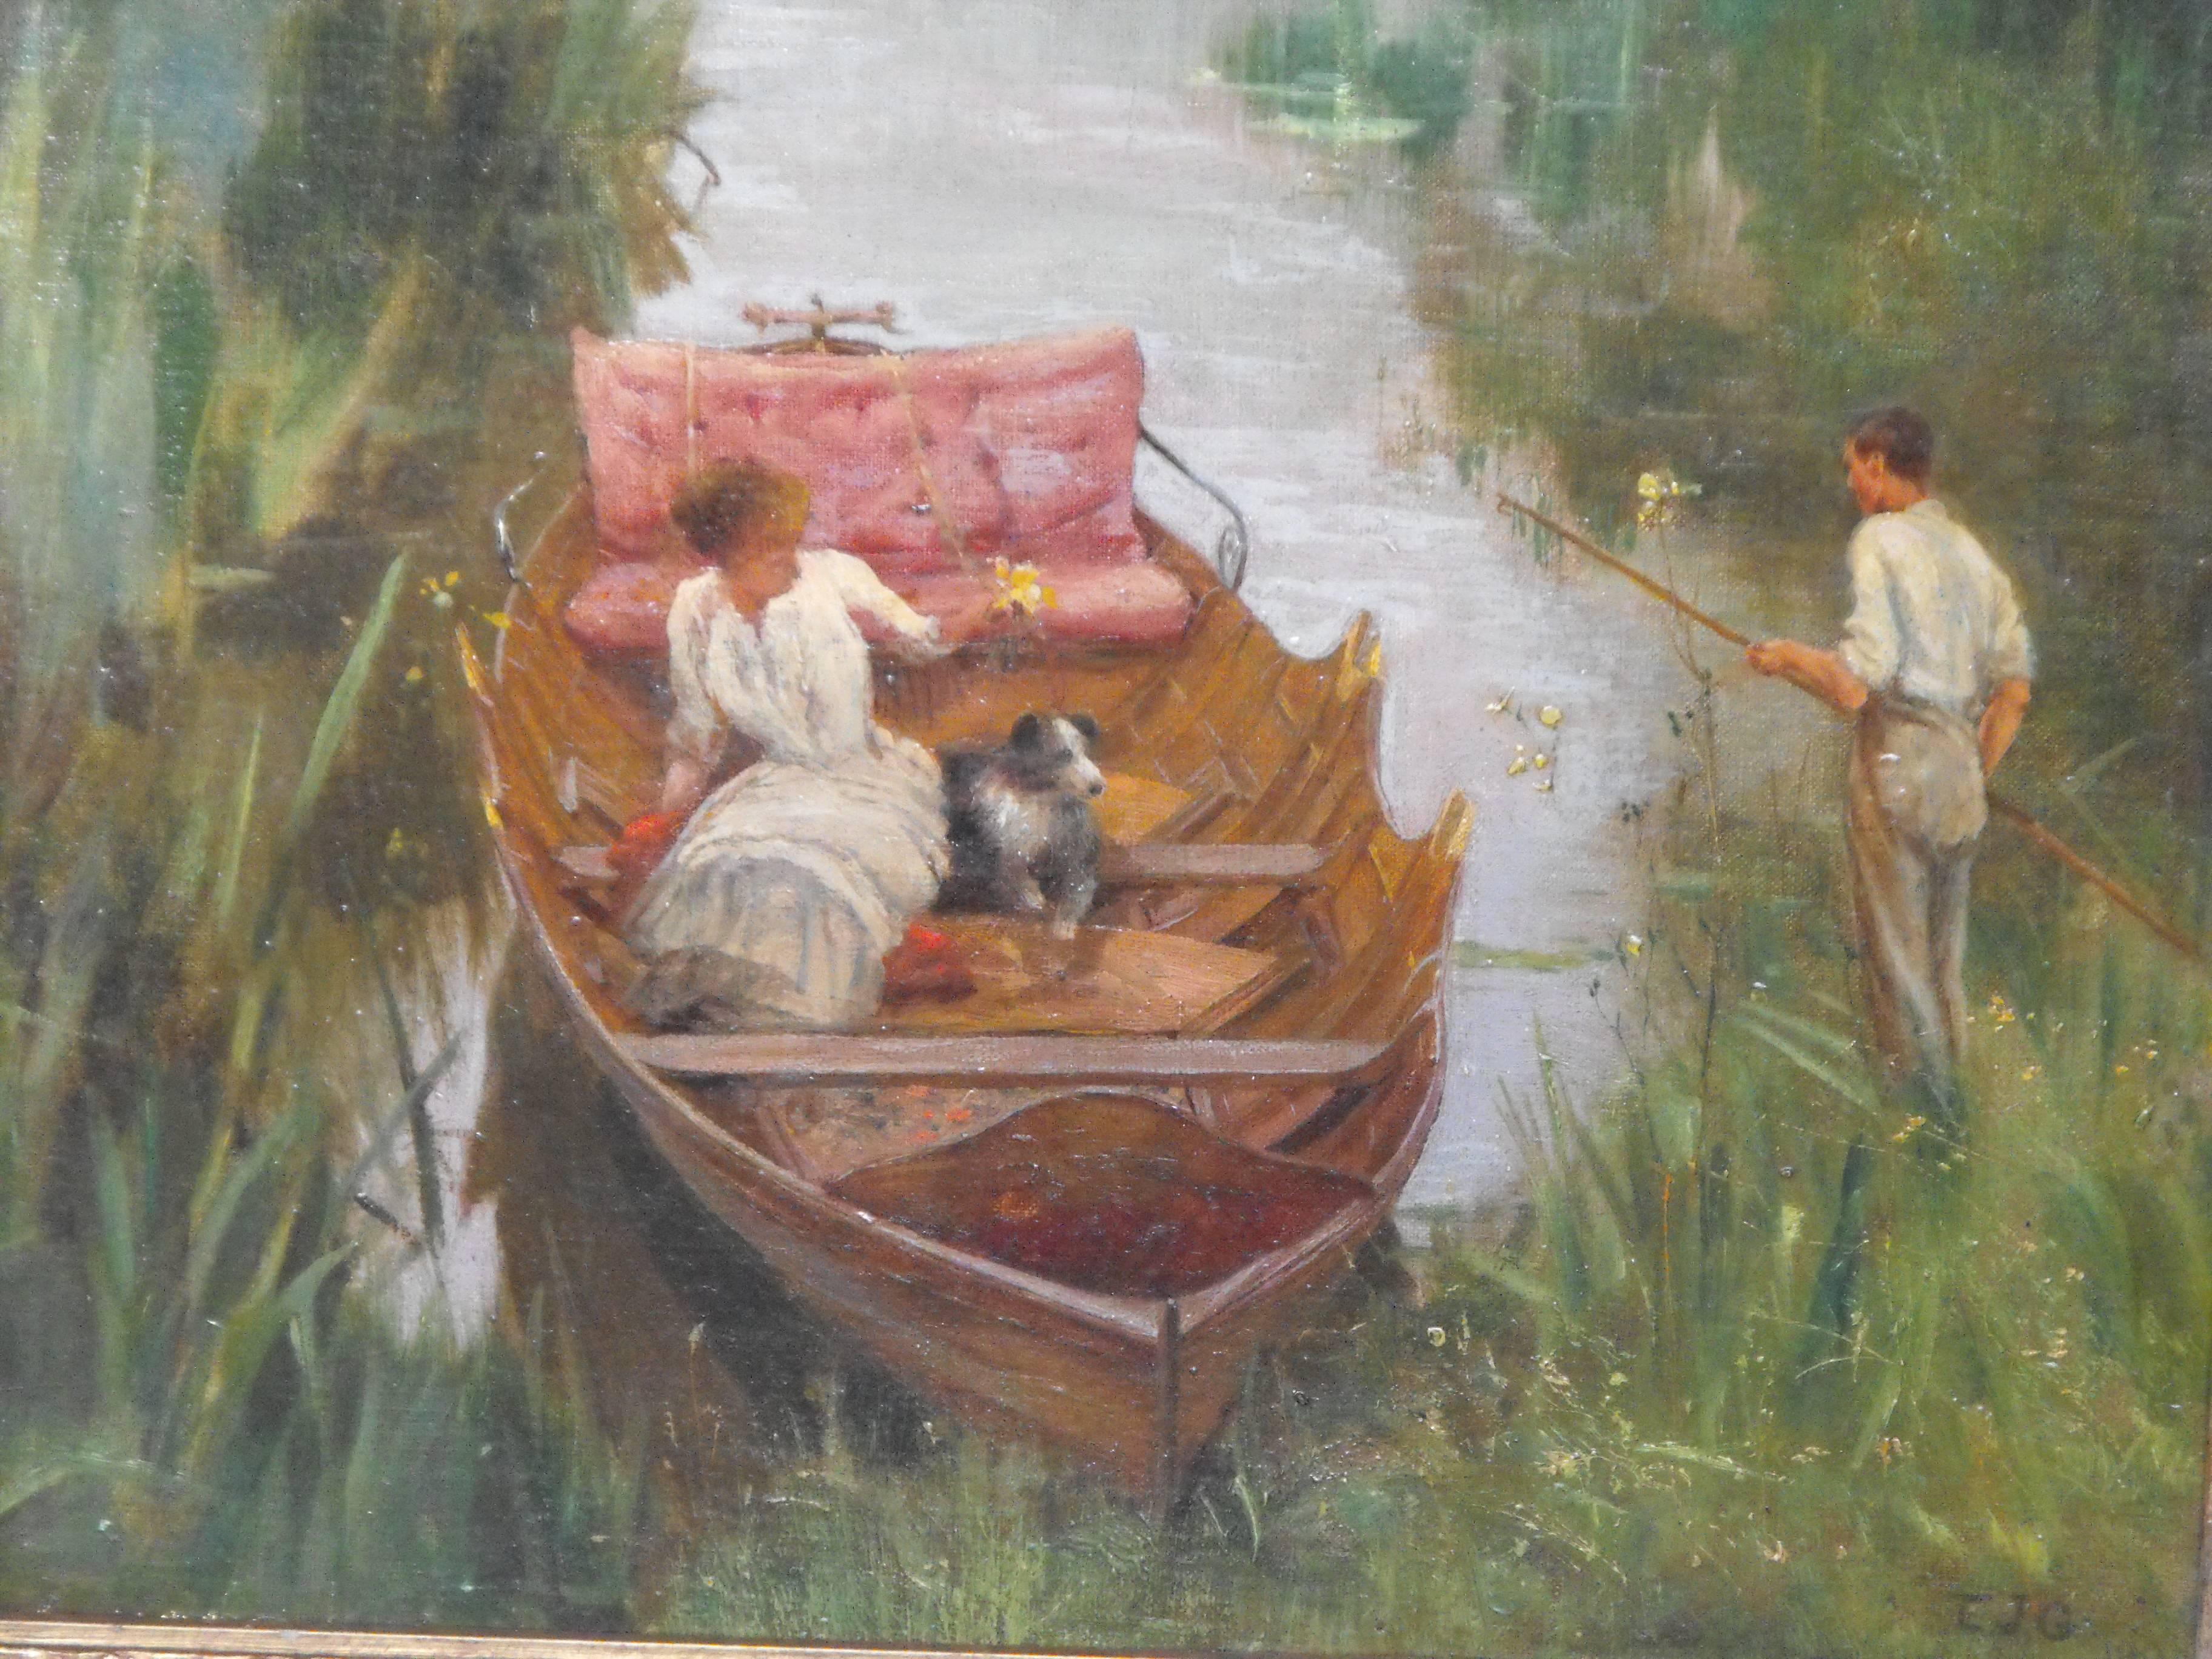 A charming believed to be a late work by Edward John Gregory antique late Victorian oil painting on canvas of a summer river boating landscape genre scene signed and dated 1900 with his initials E.J.G. which he sometimes did, especially in his later